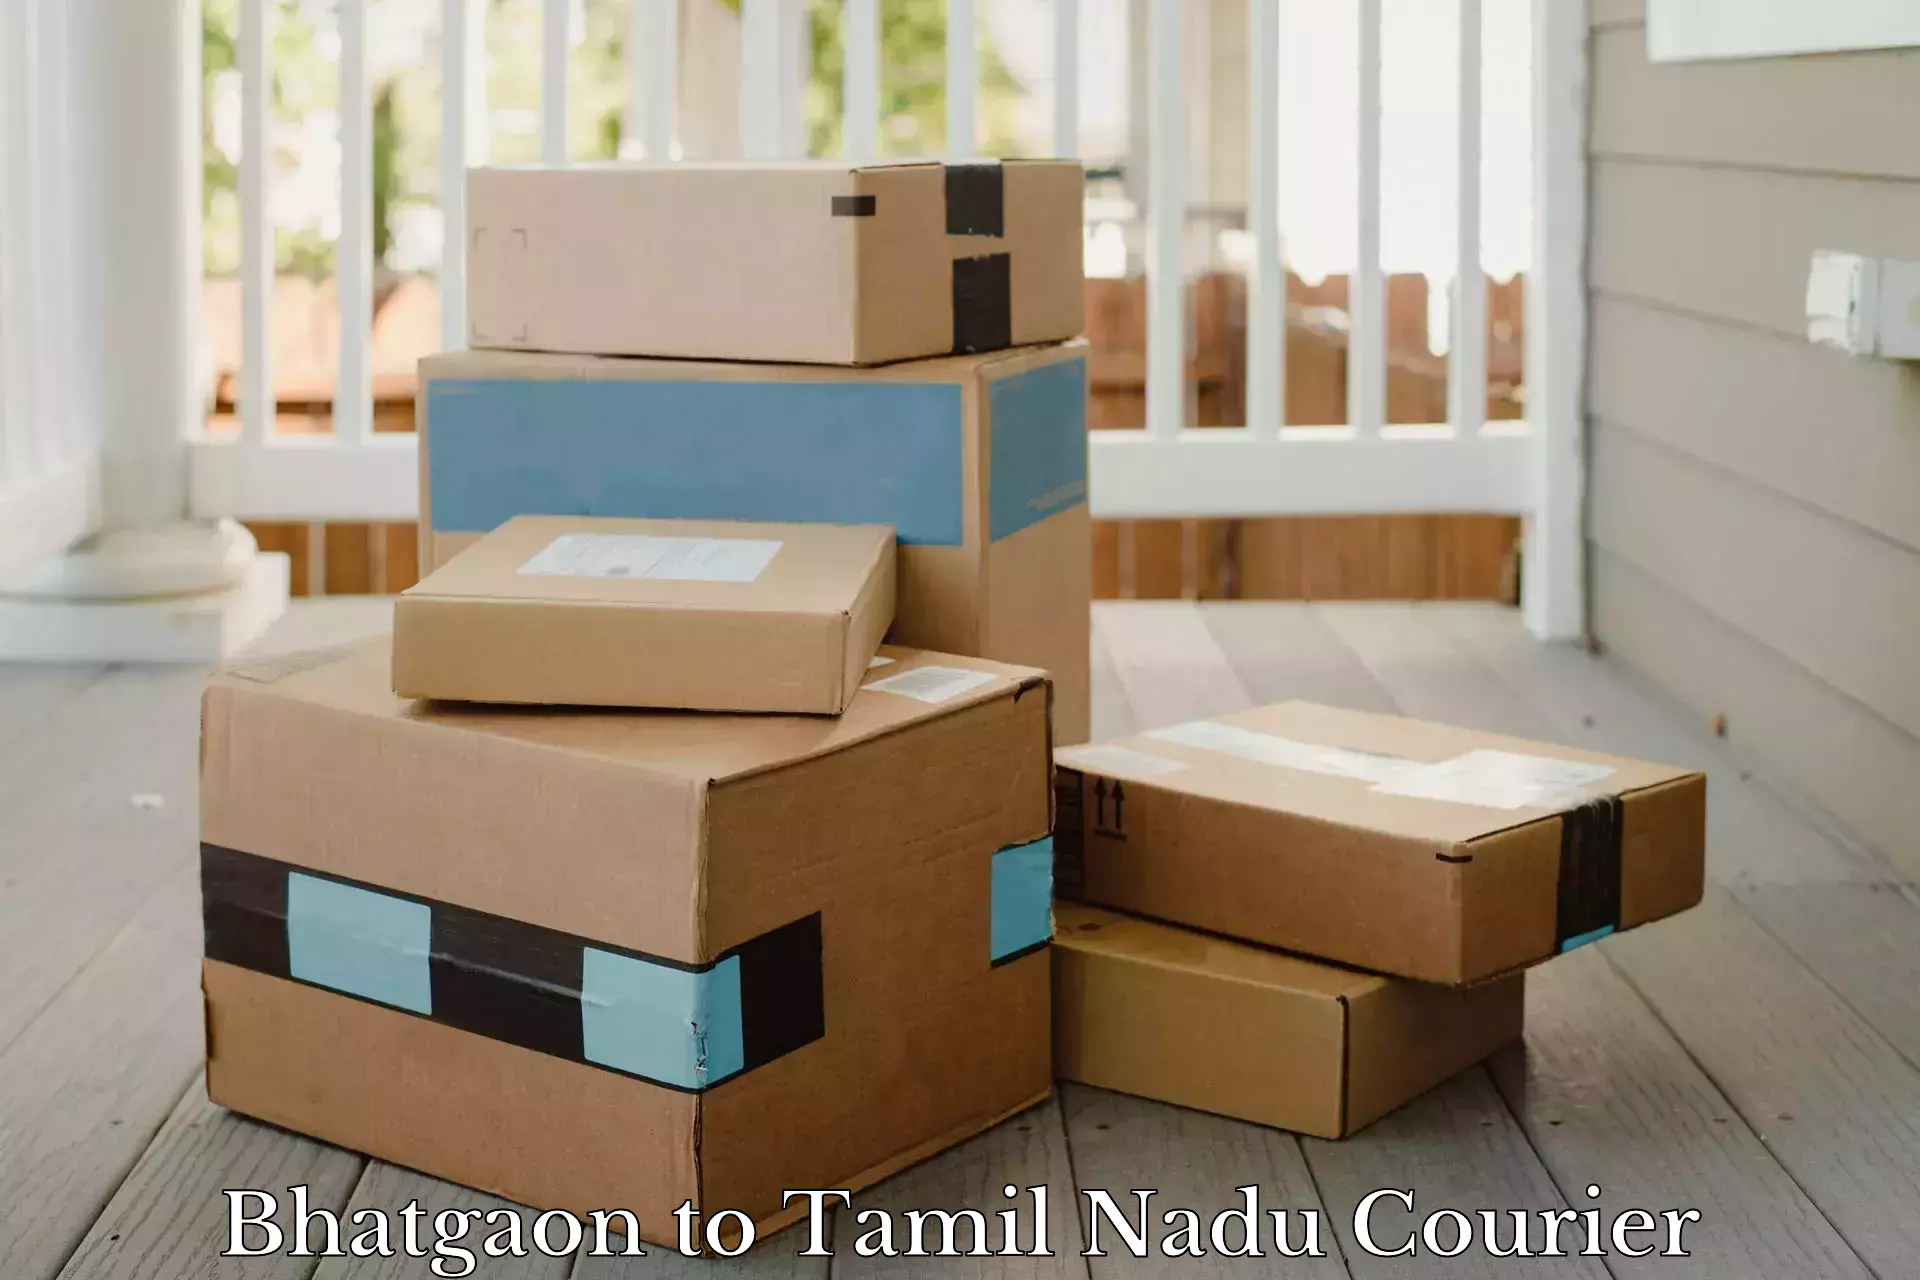 Nationwide parcel services Bhatgaon to Coimbatore